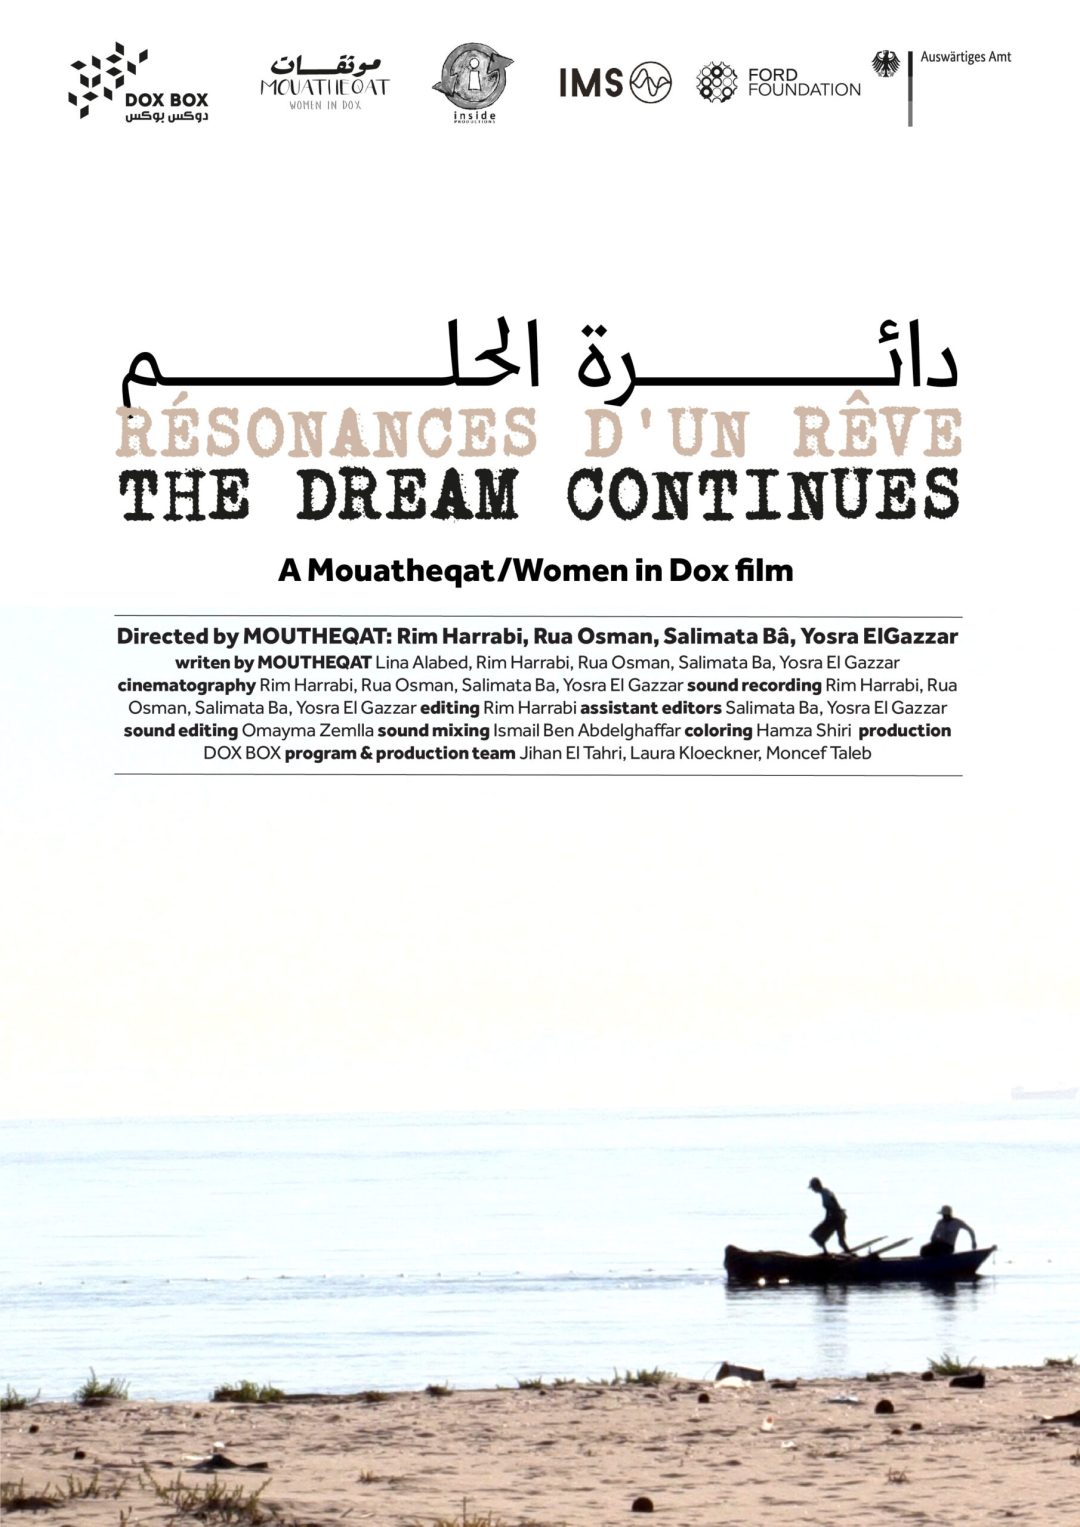 Poster_DreamContinues_AR_EN_FR-scaled